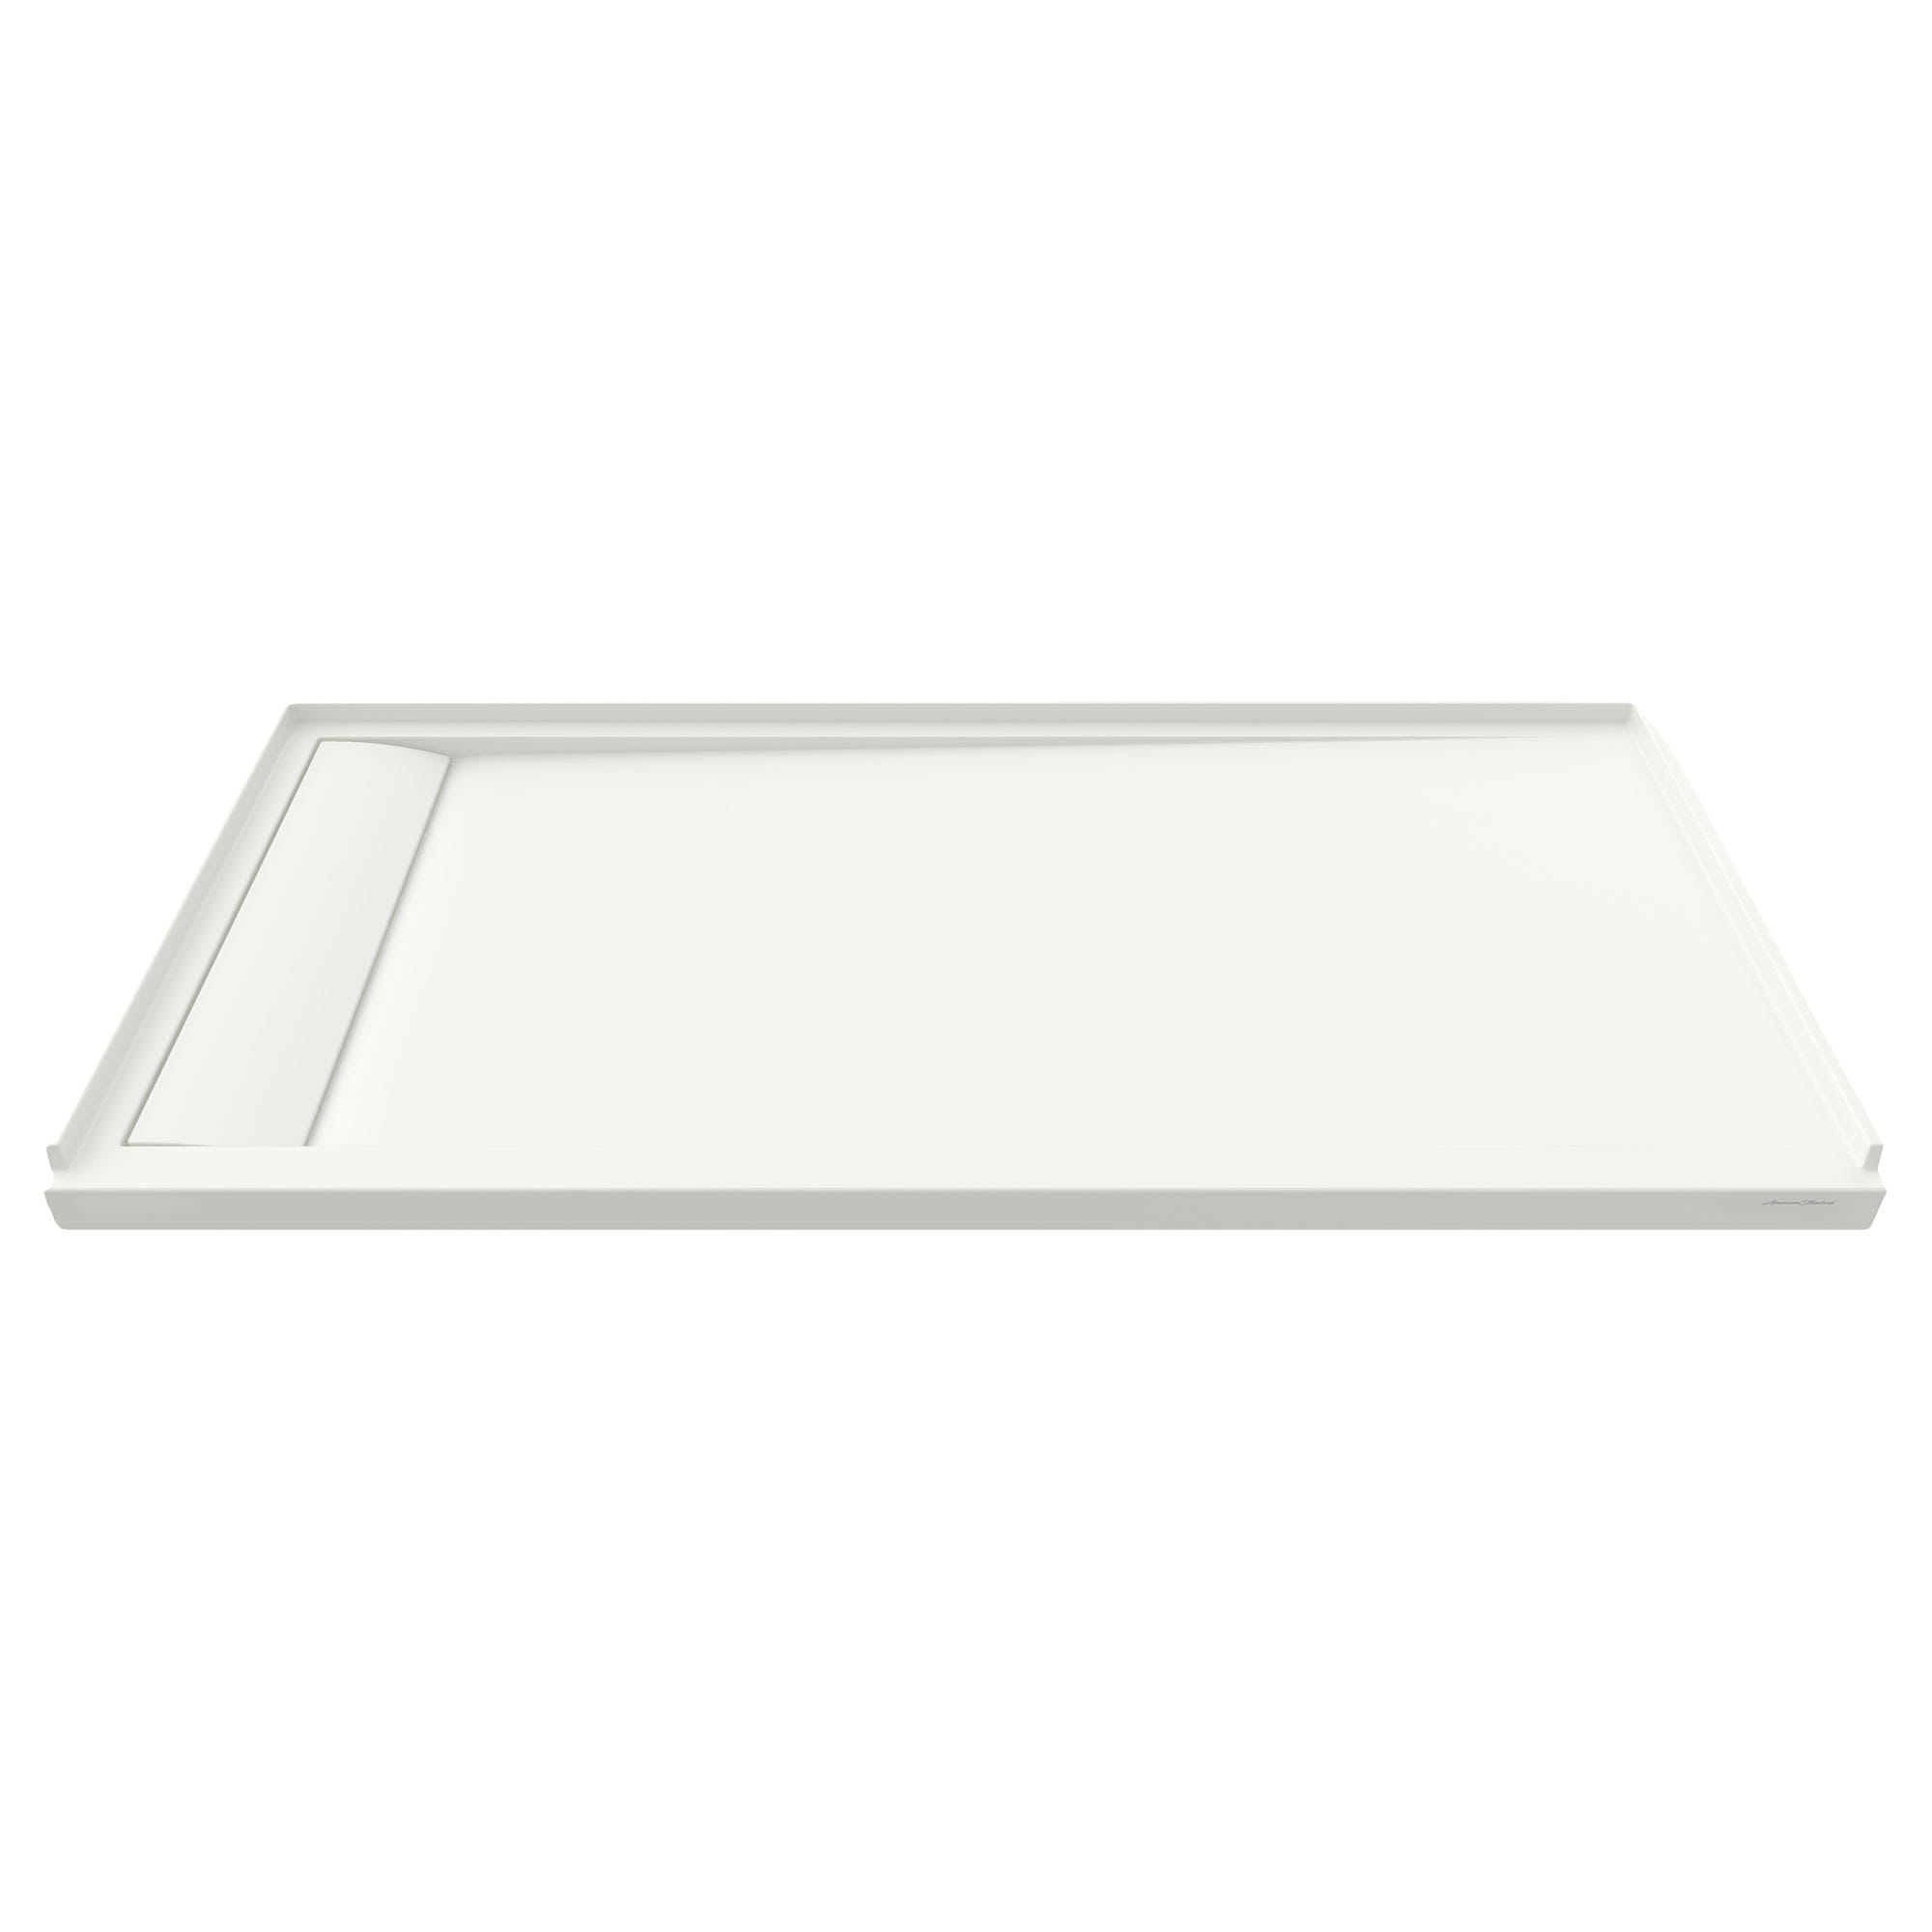 Townsend 60 x 30 Inch Single Threshold Shower Base With Left Hand Outlet SOFT WHITE